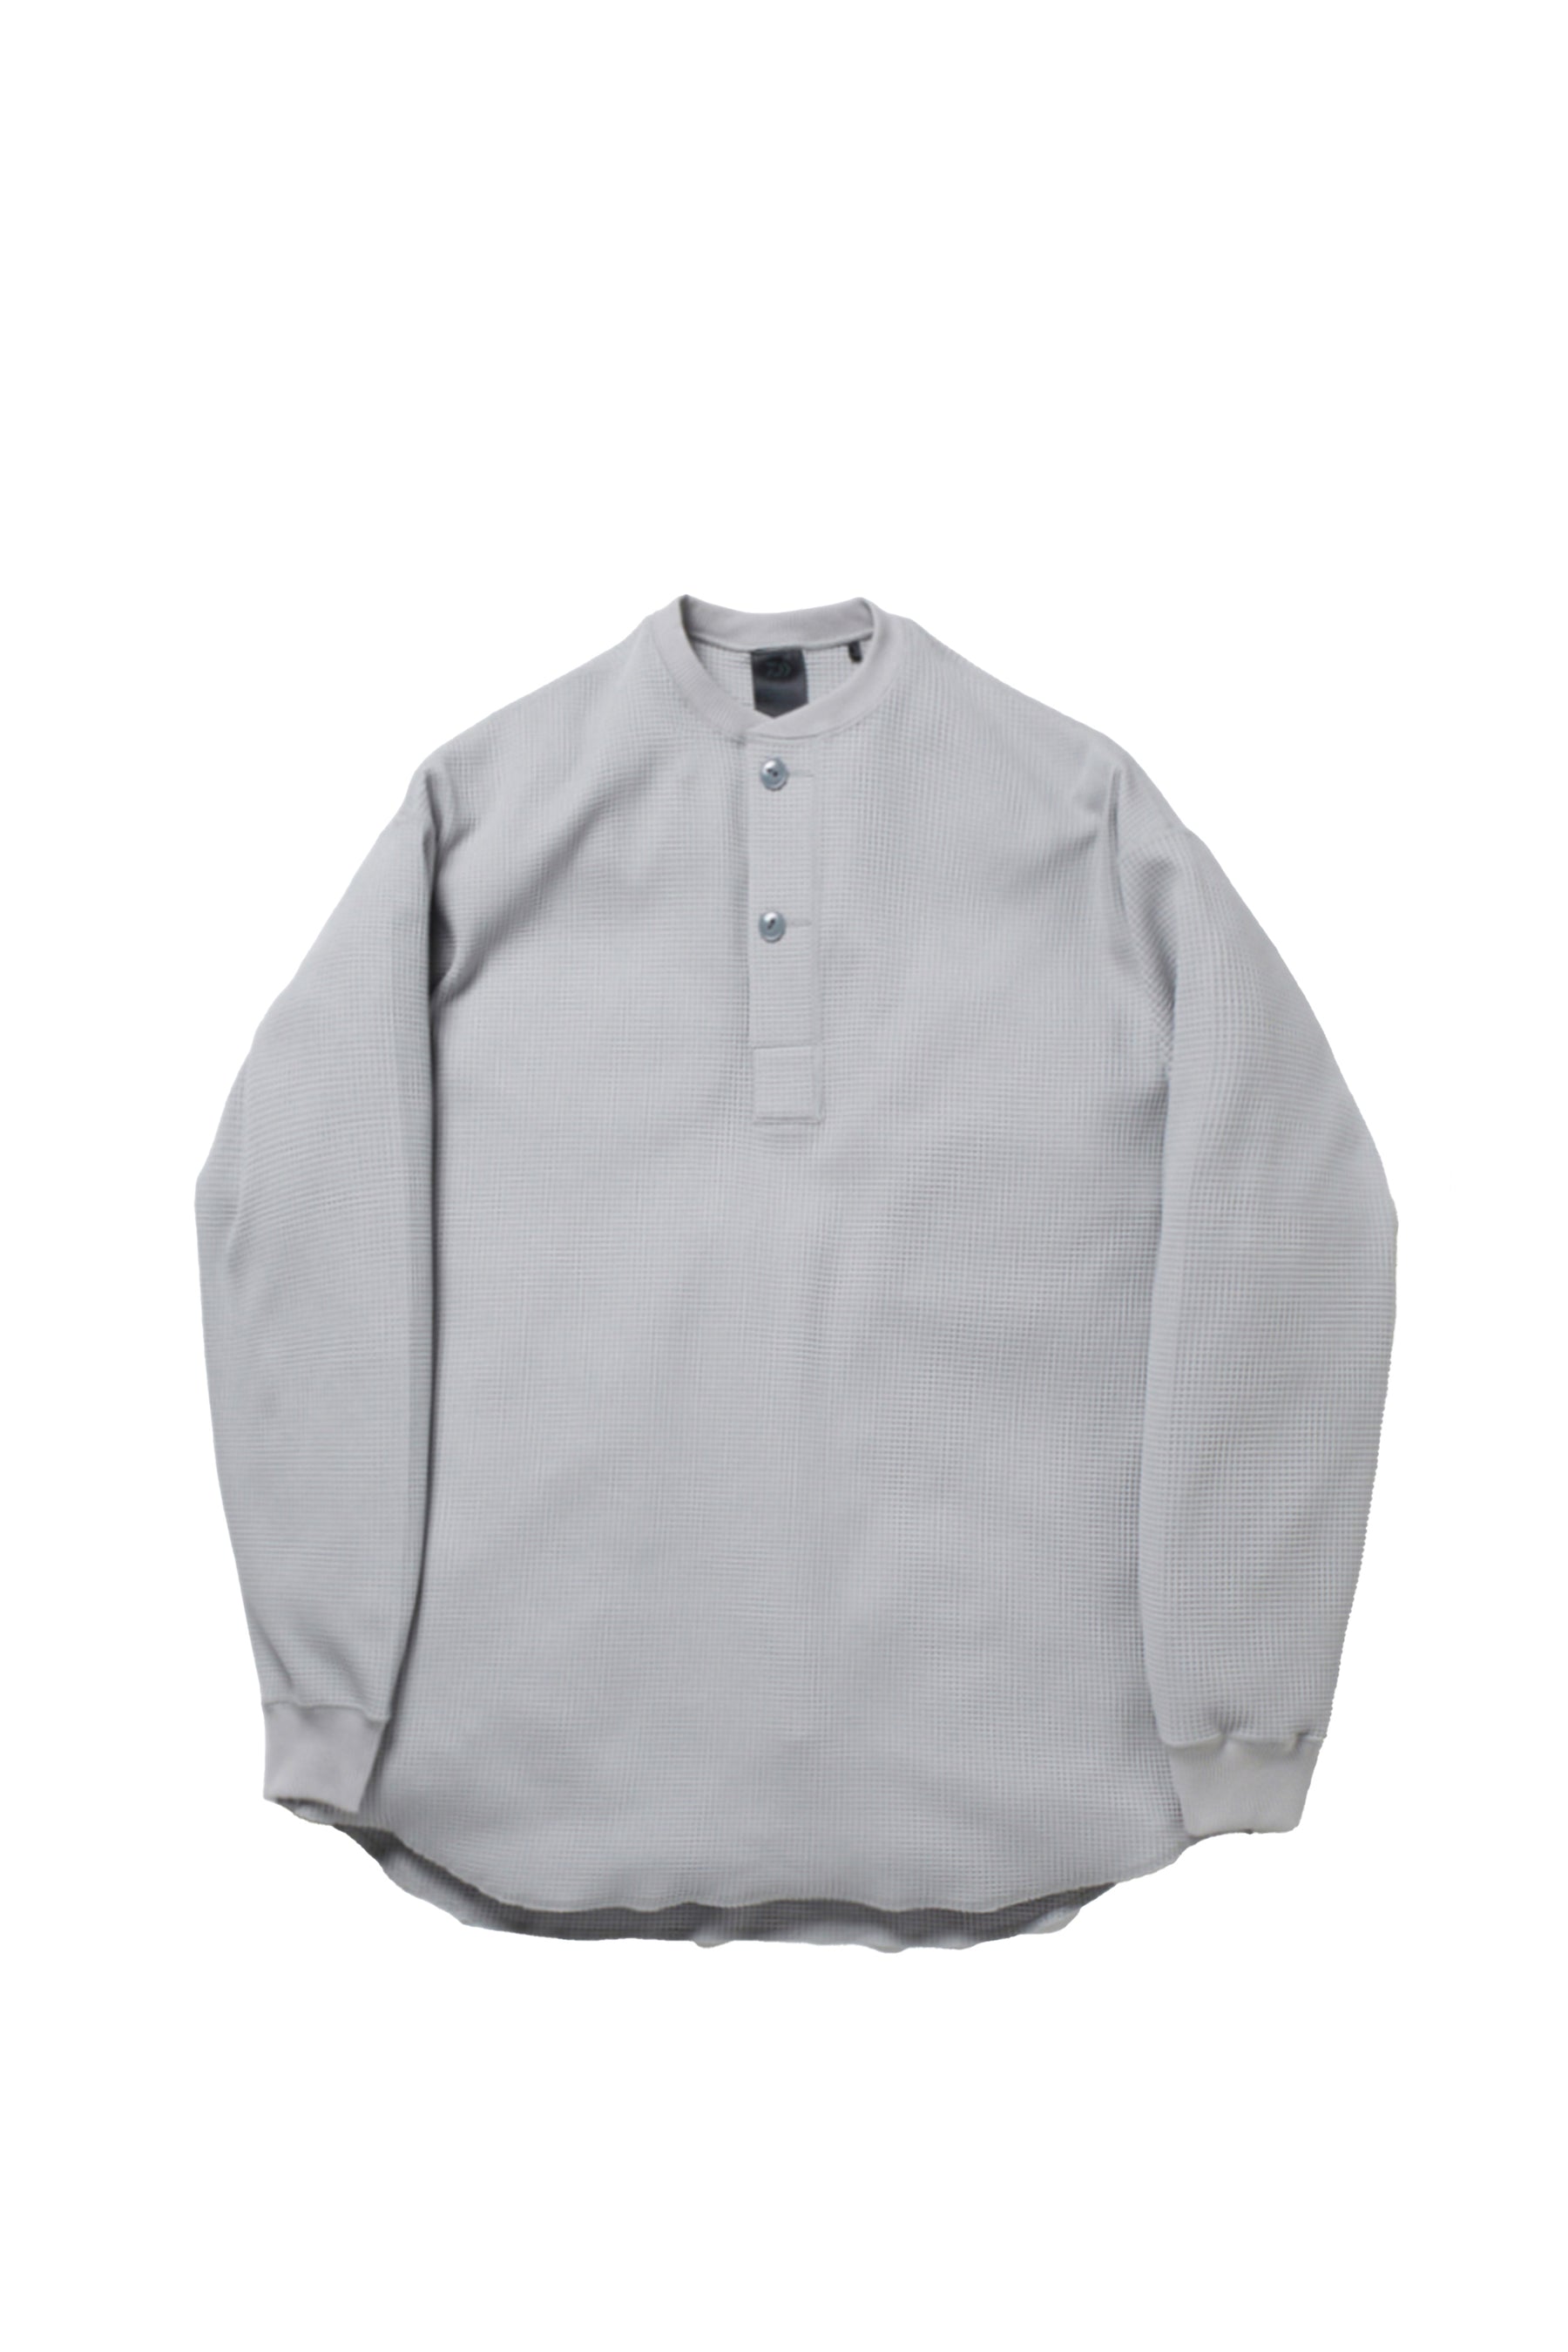 TECH THERMAL HENLEY CREW L/S / L GRY